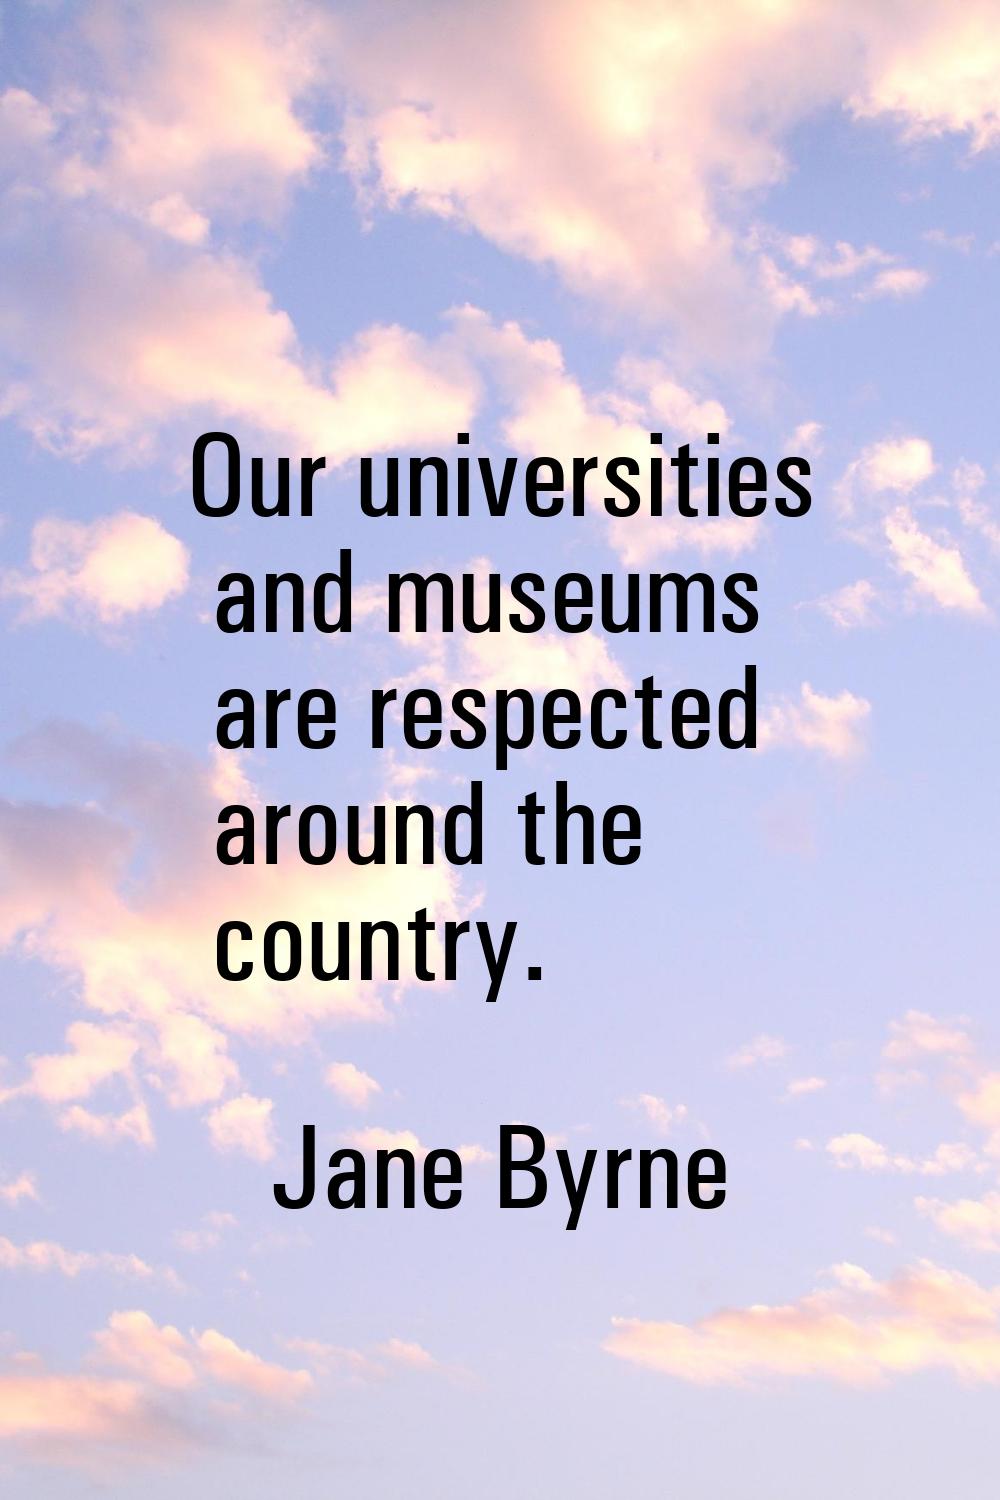 Our universities and museums are respected around the country.